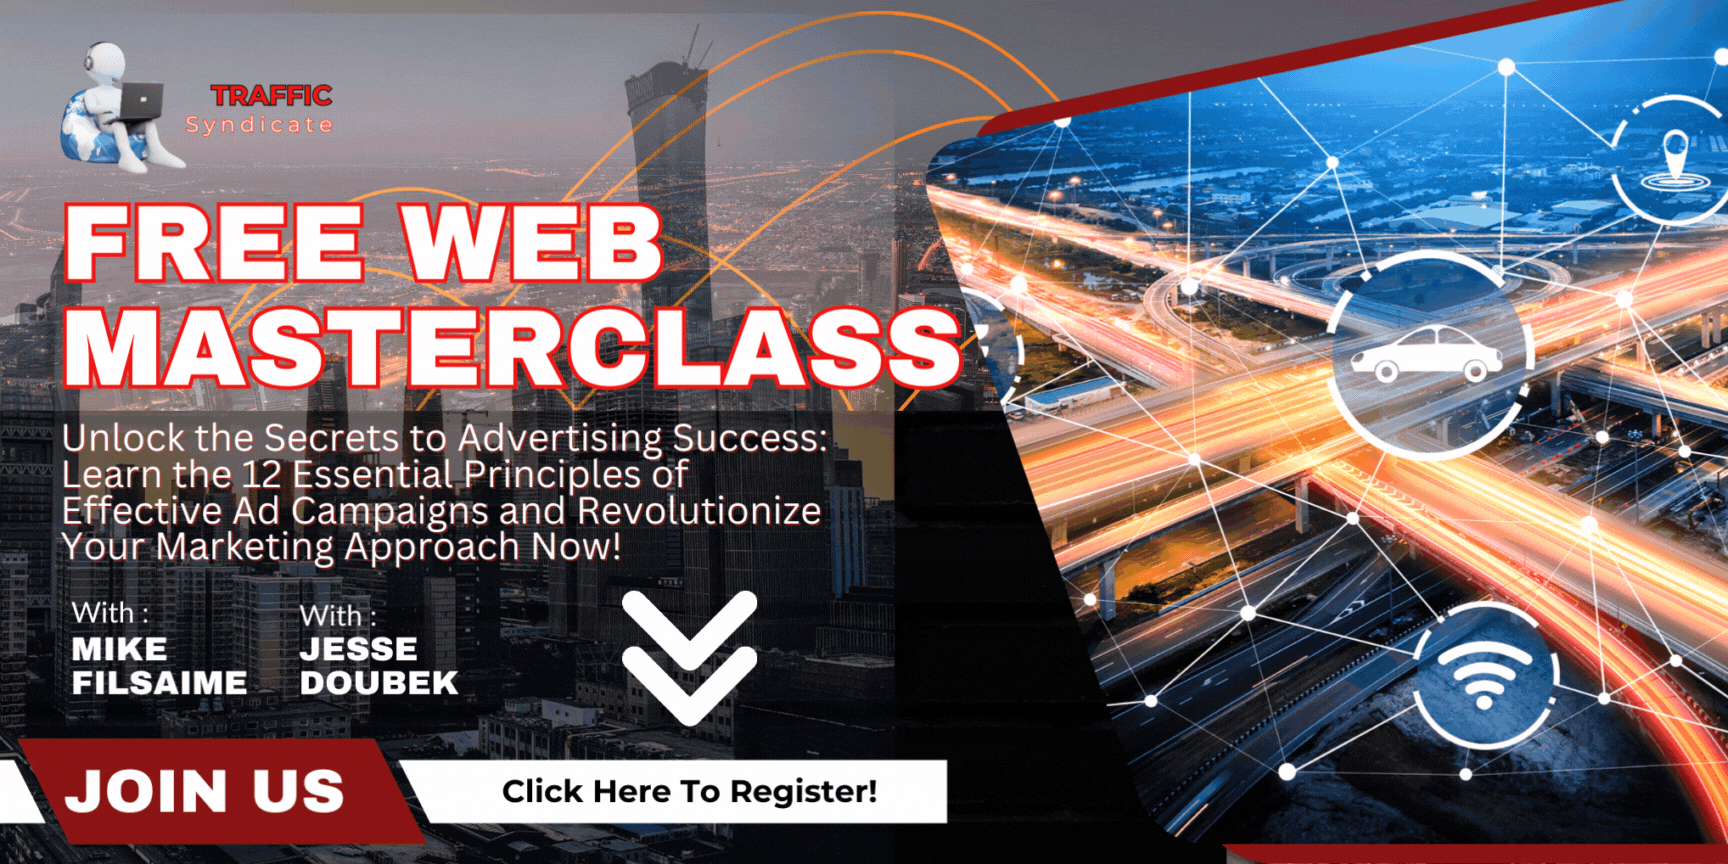 Image promoting a free webclass webinar on driving traffic. Join now!